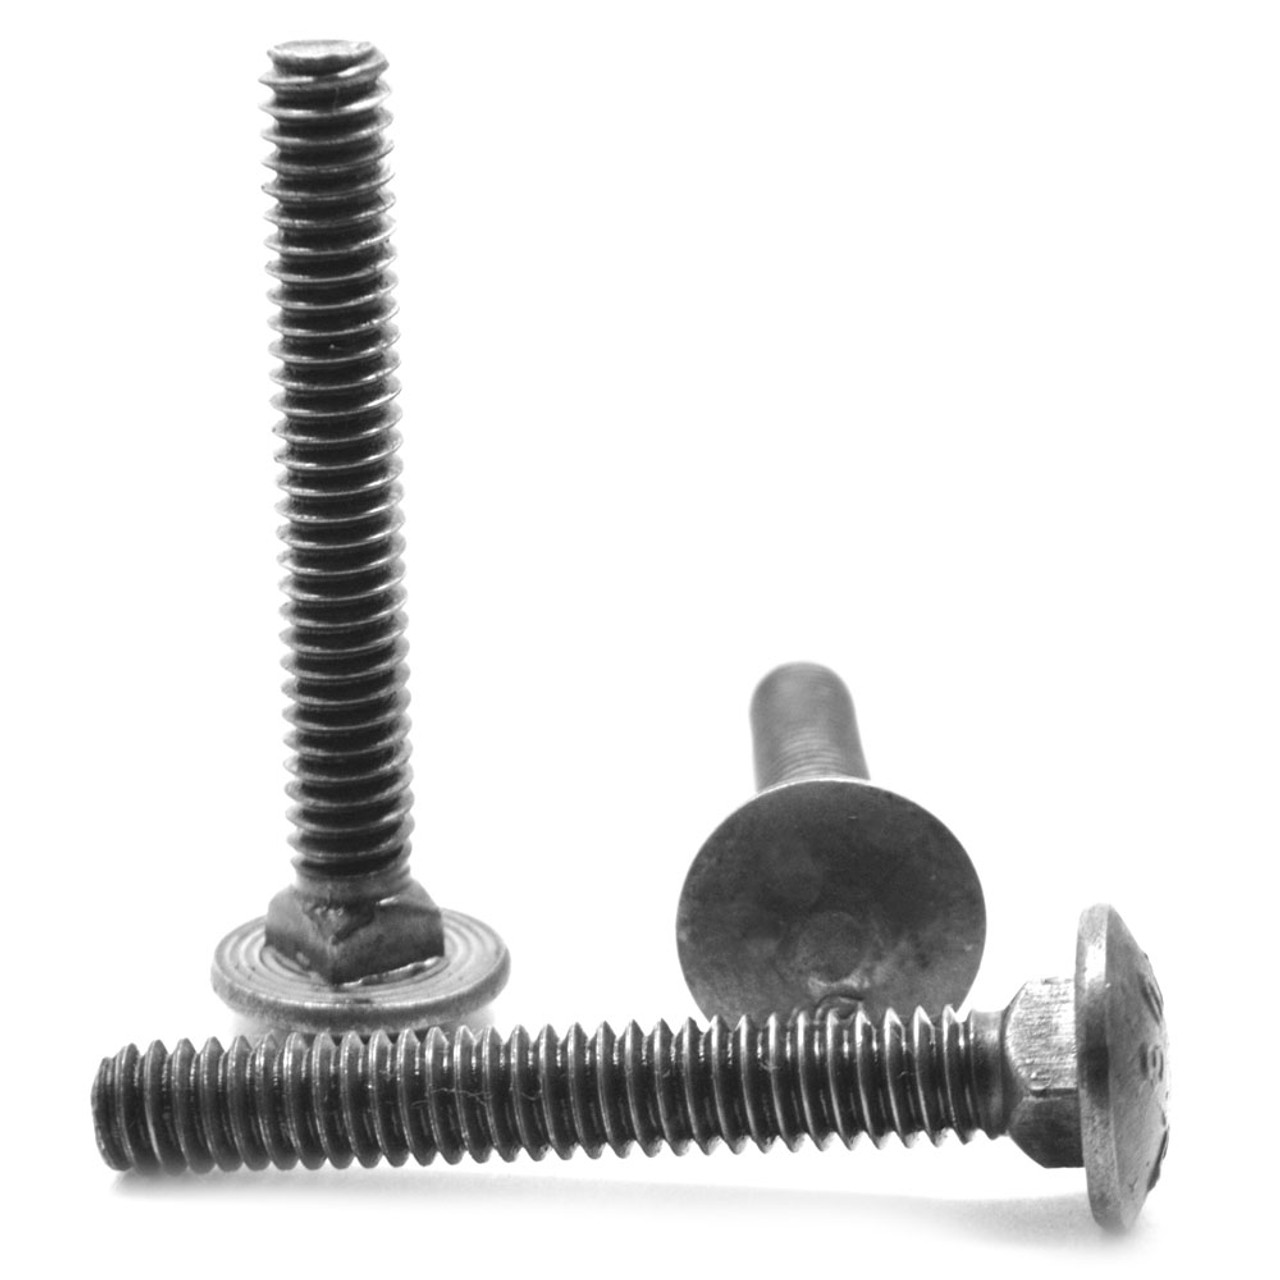 5/16"-18 x 1 1/2" (FT) Coarse Thread A307 Grade A Carriage Bolt Low Carbon Steel Plain Finish